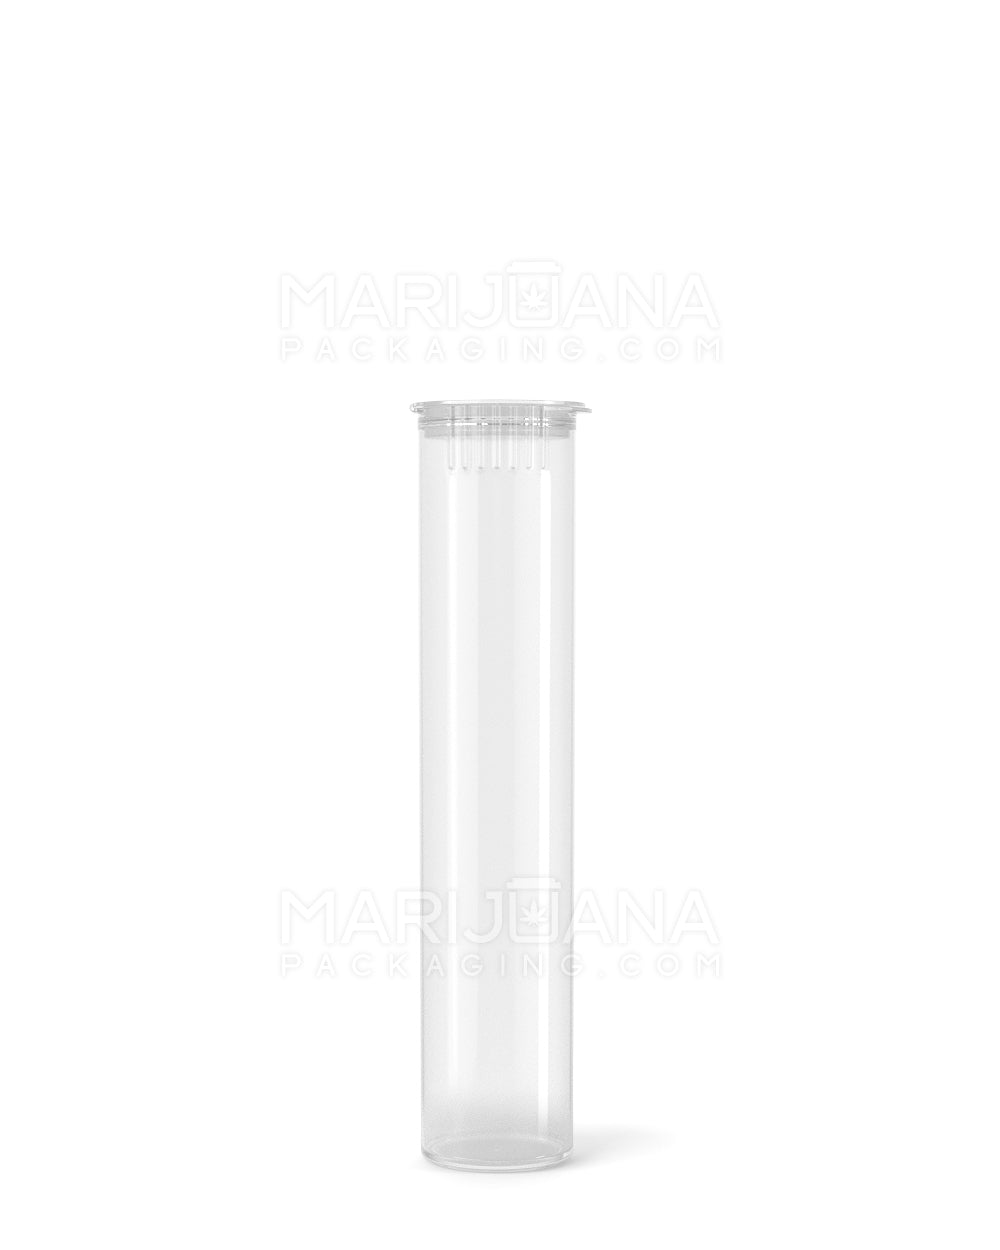 Child Resistant | Pop Top Plastic Pre-Roll Tubes | 90mm - Clear - 1000 Count - 2